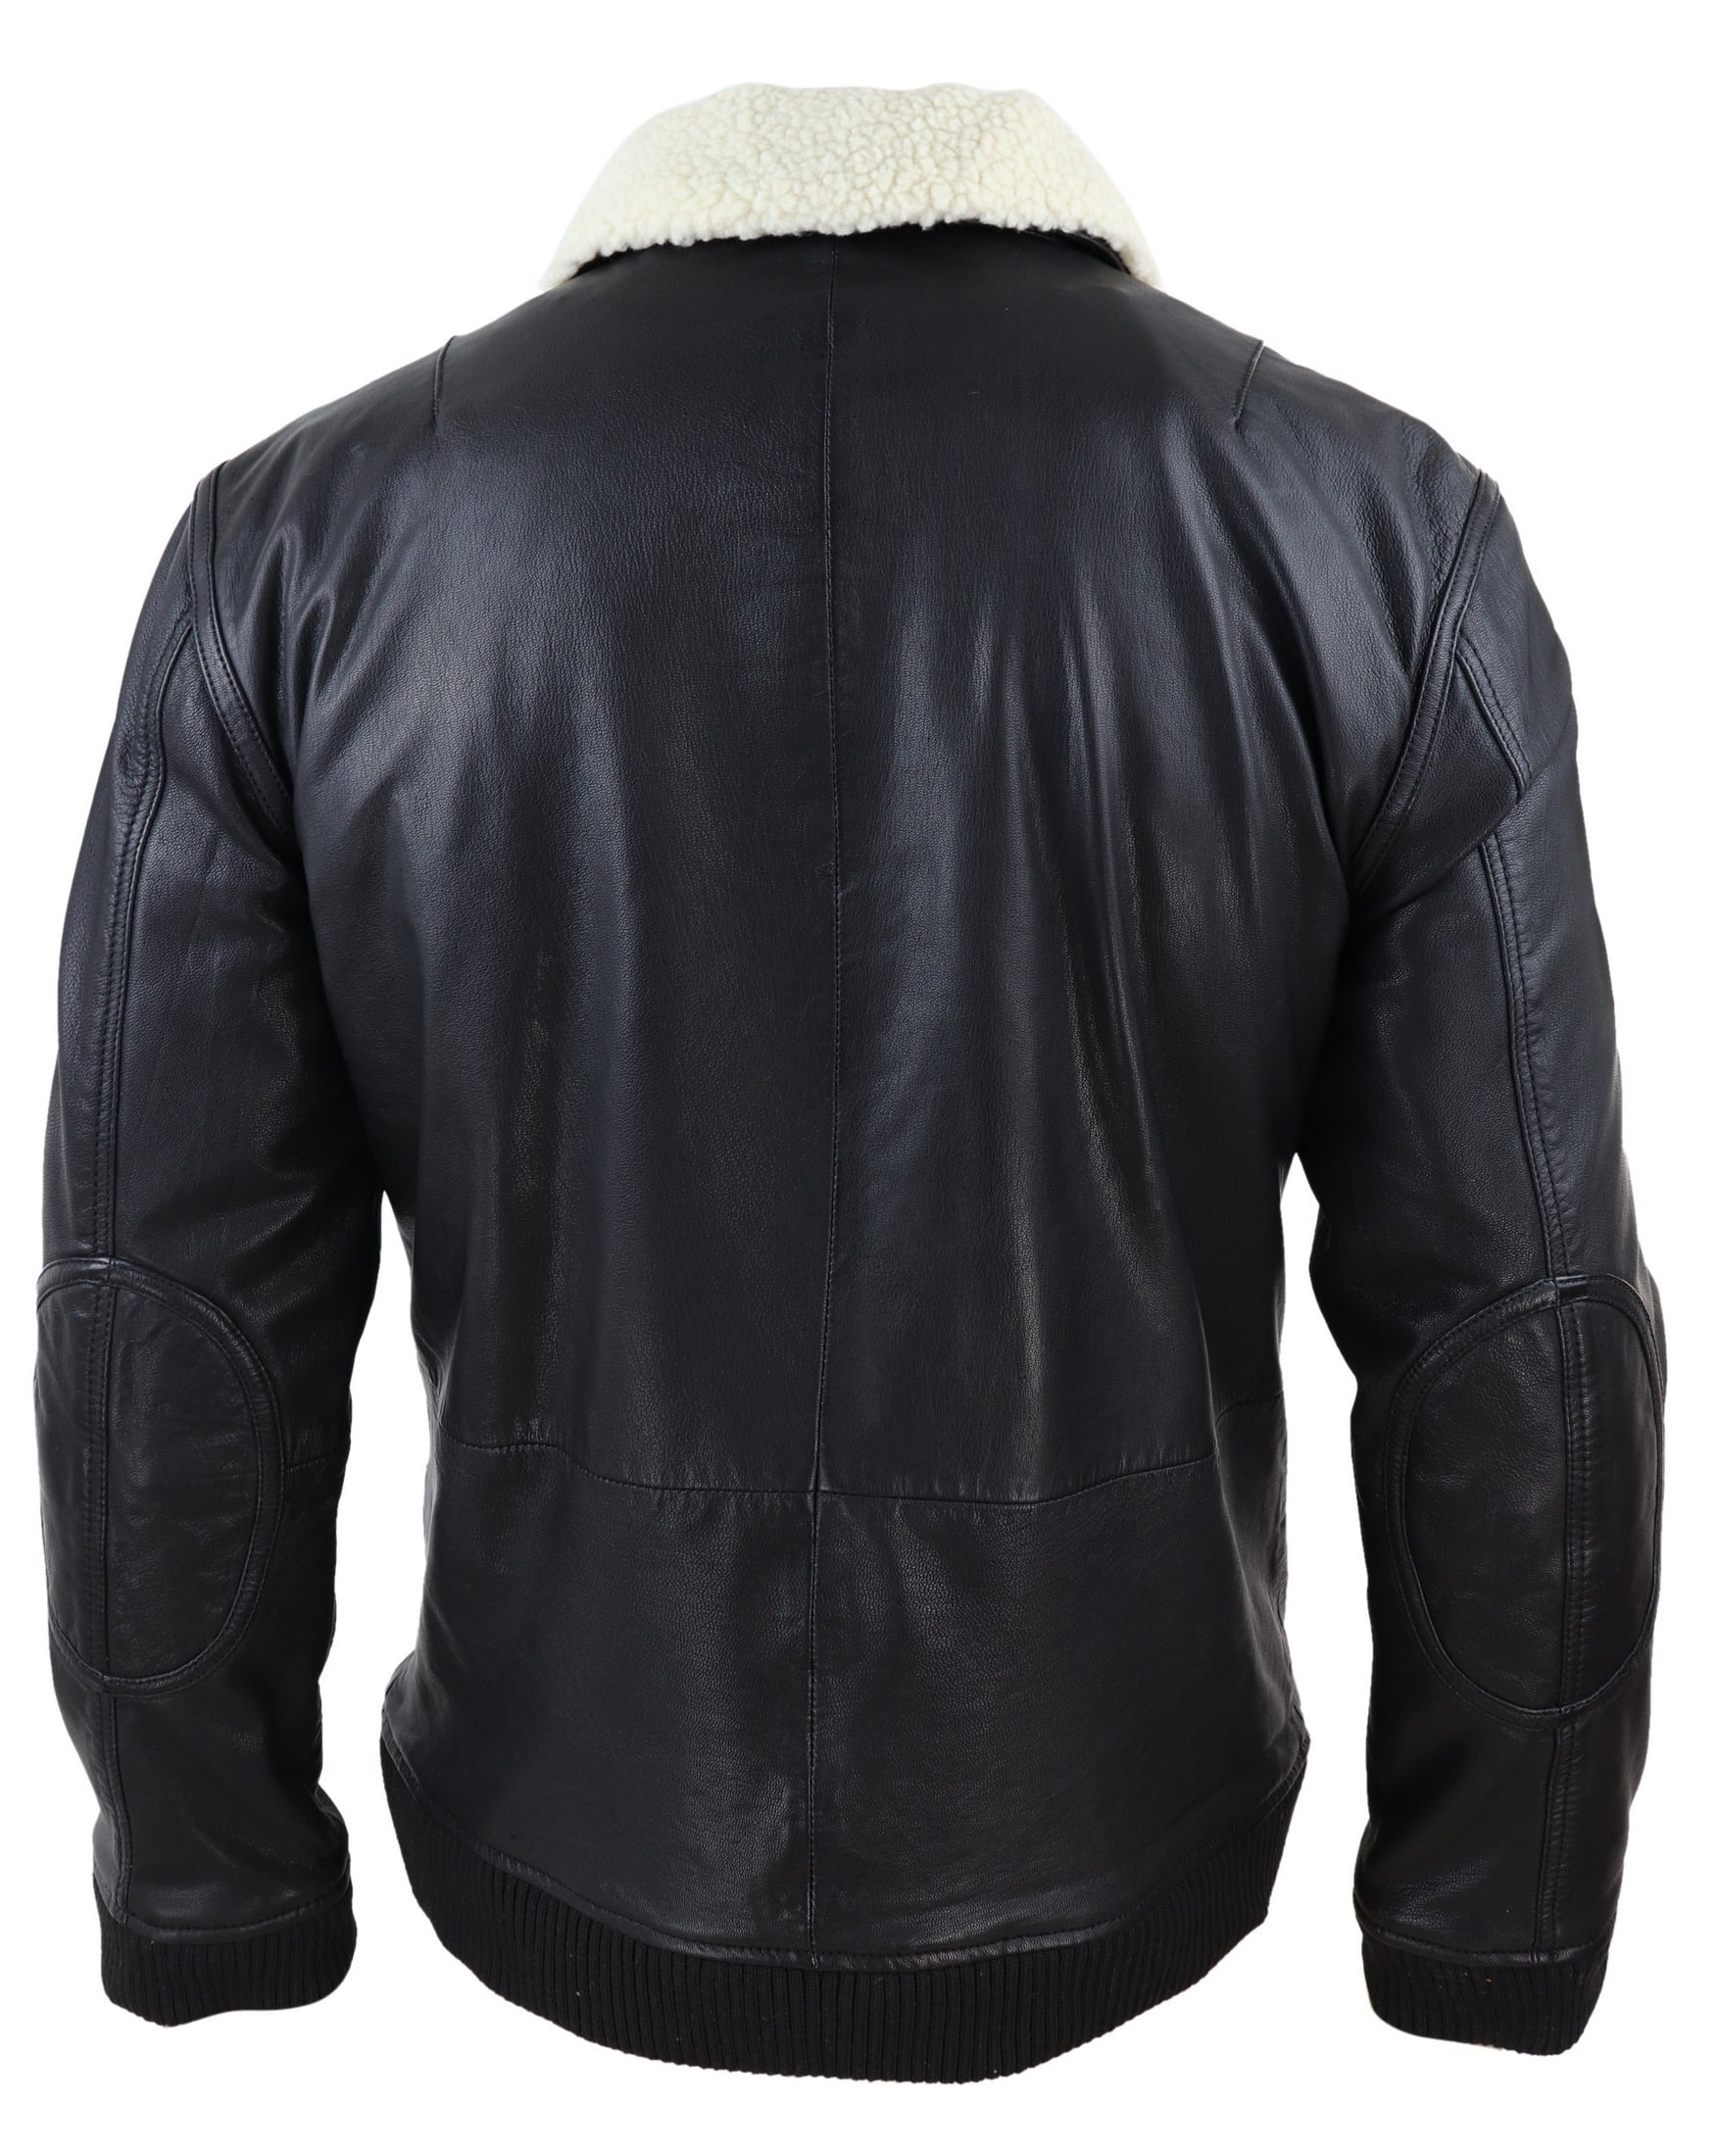 Mens Black Leather Bomber Jacket with White Collar: Buy Online - Happy ...